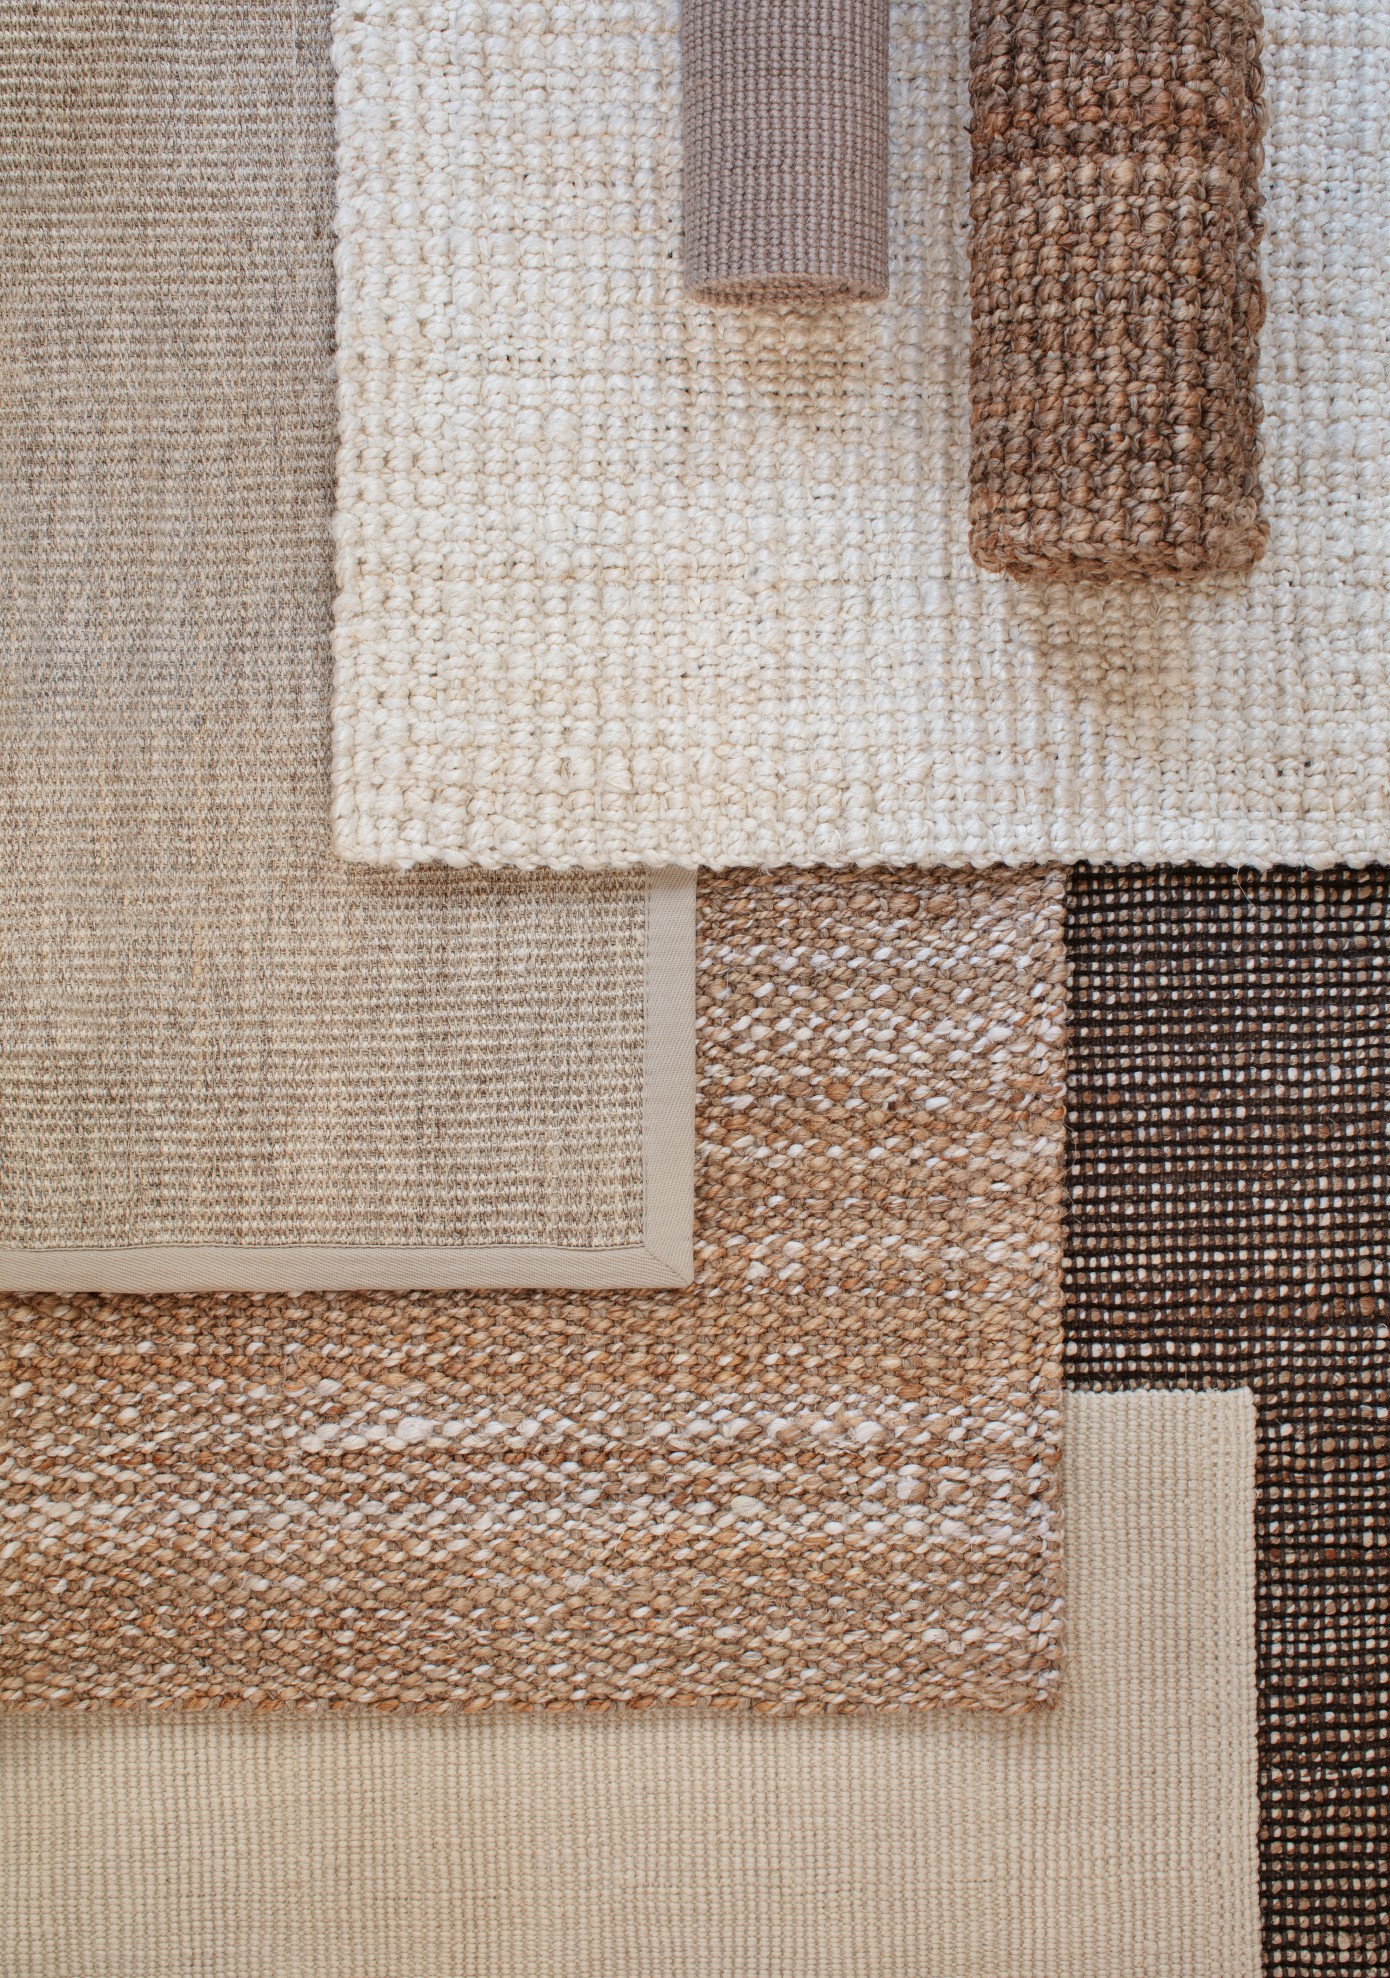 Collage of doormats in jute and sisal, from Dixie